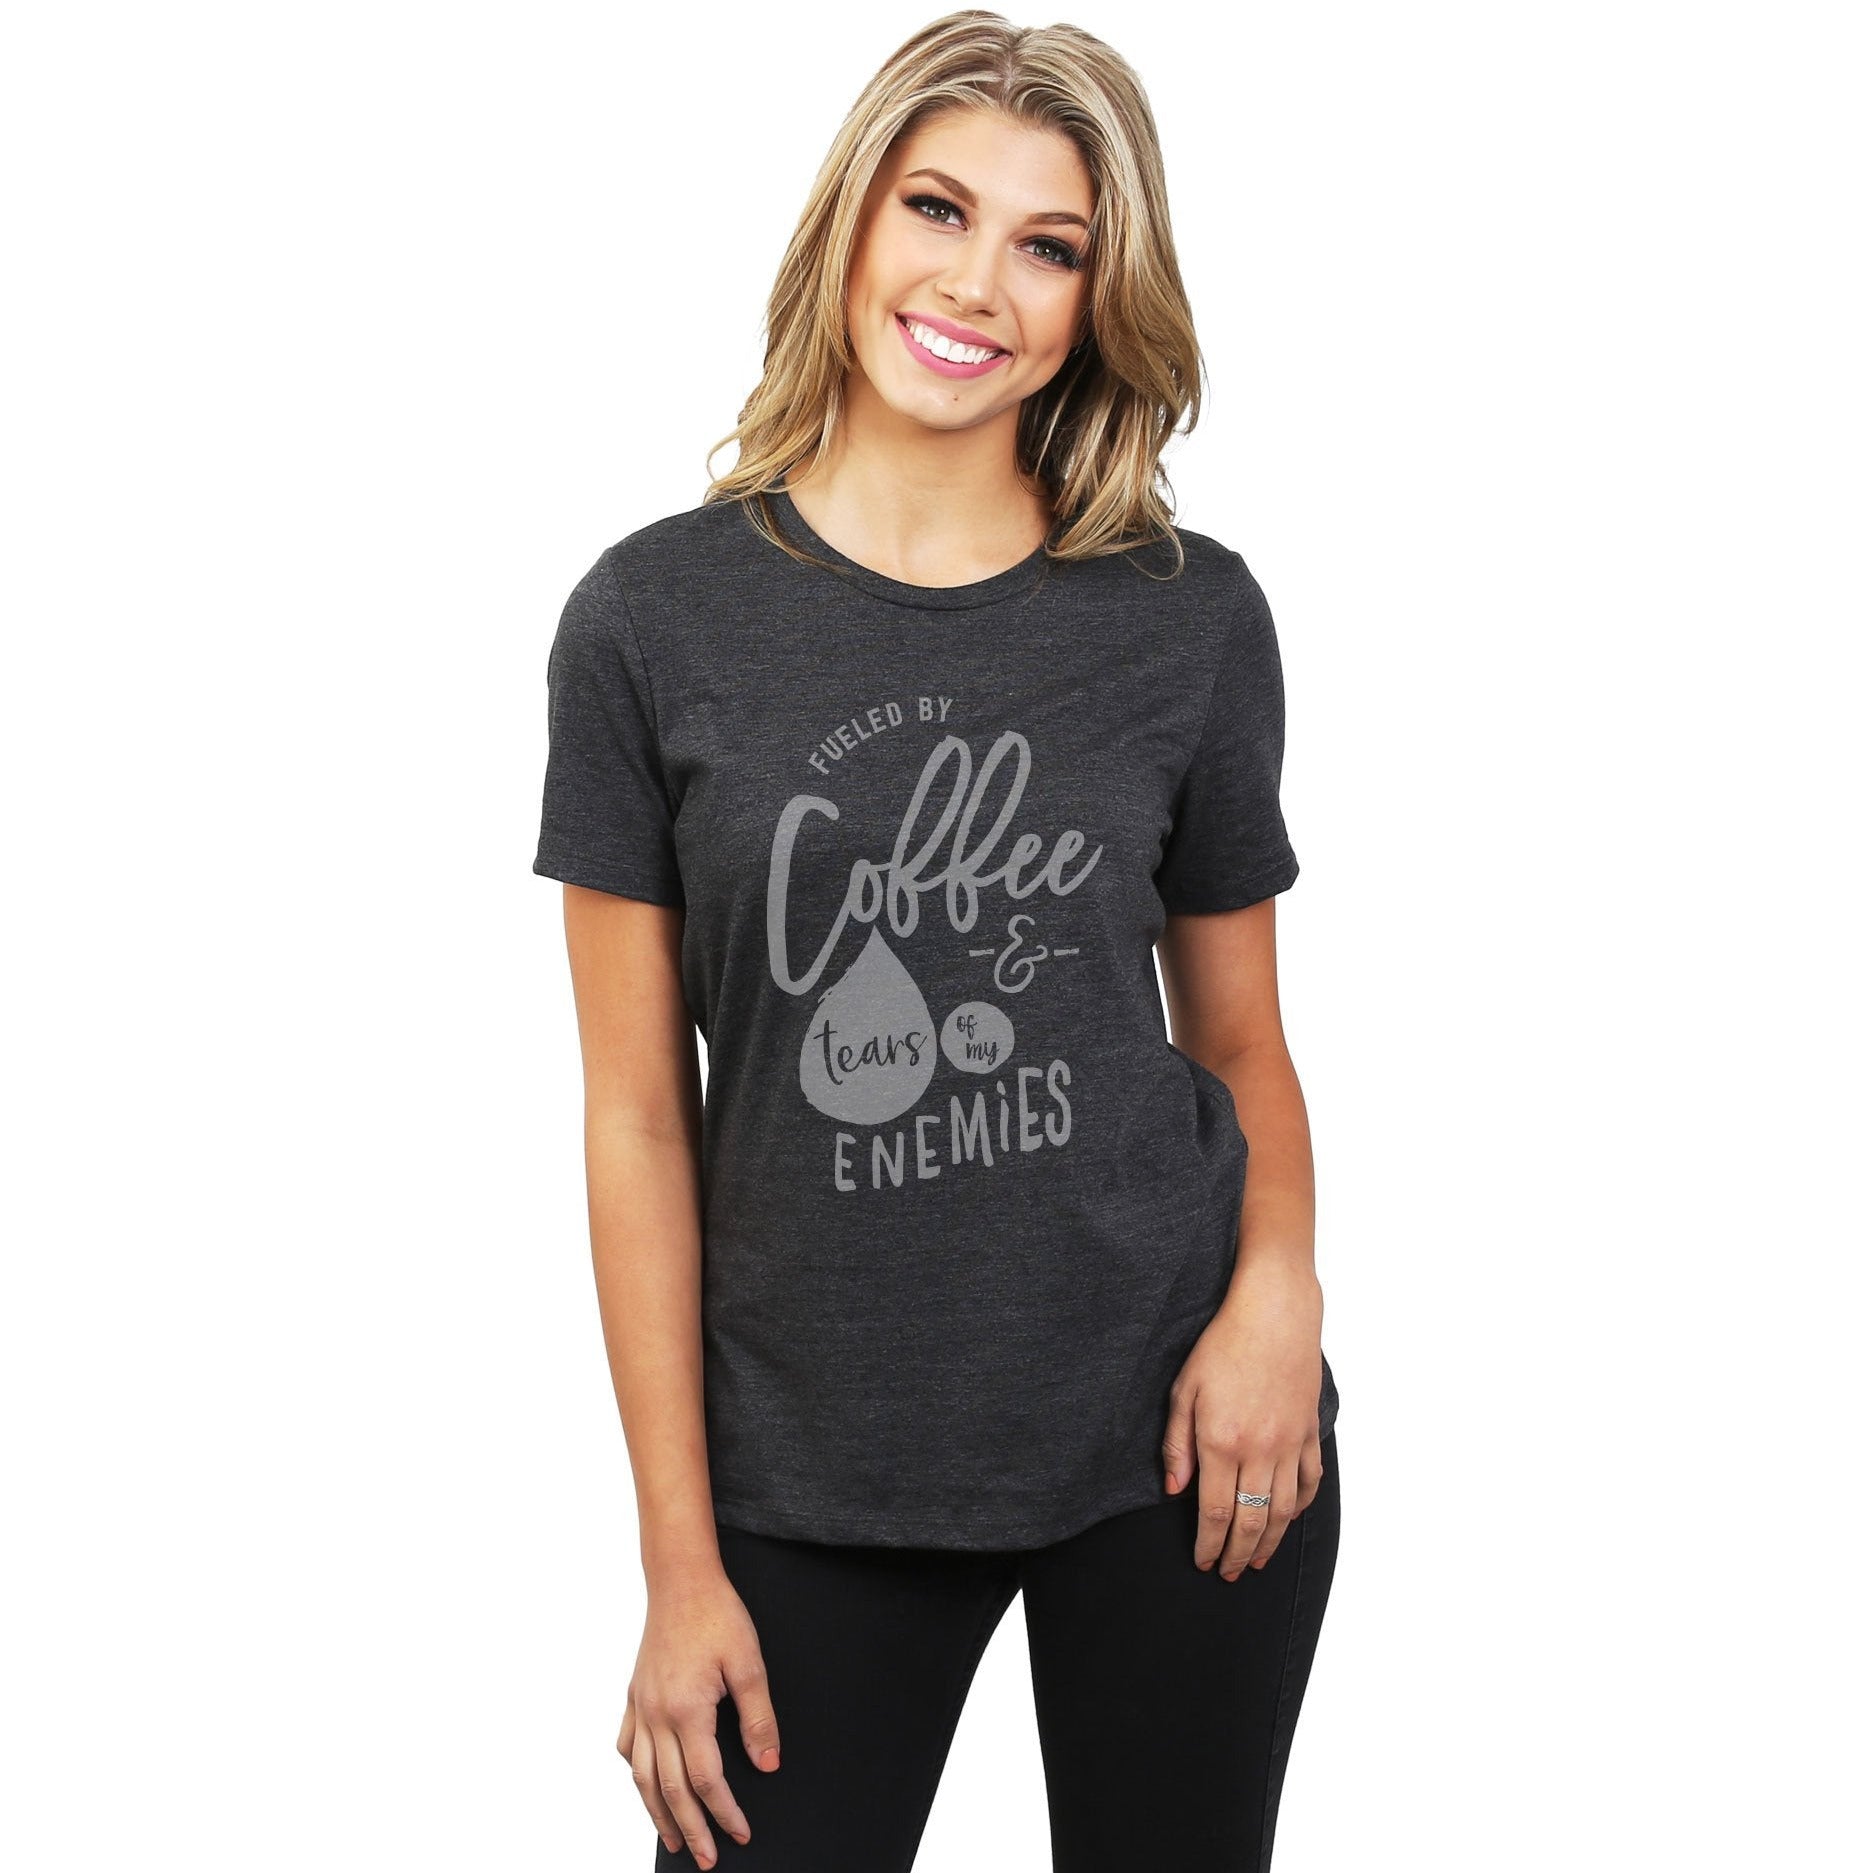 Fueled By Coffee And Tears Of My Enemies Women's Relaxed Crewneck T-Shirt Top Tee Charcoal Model
